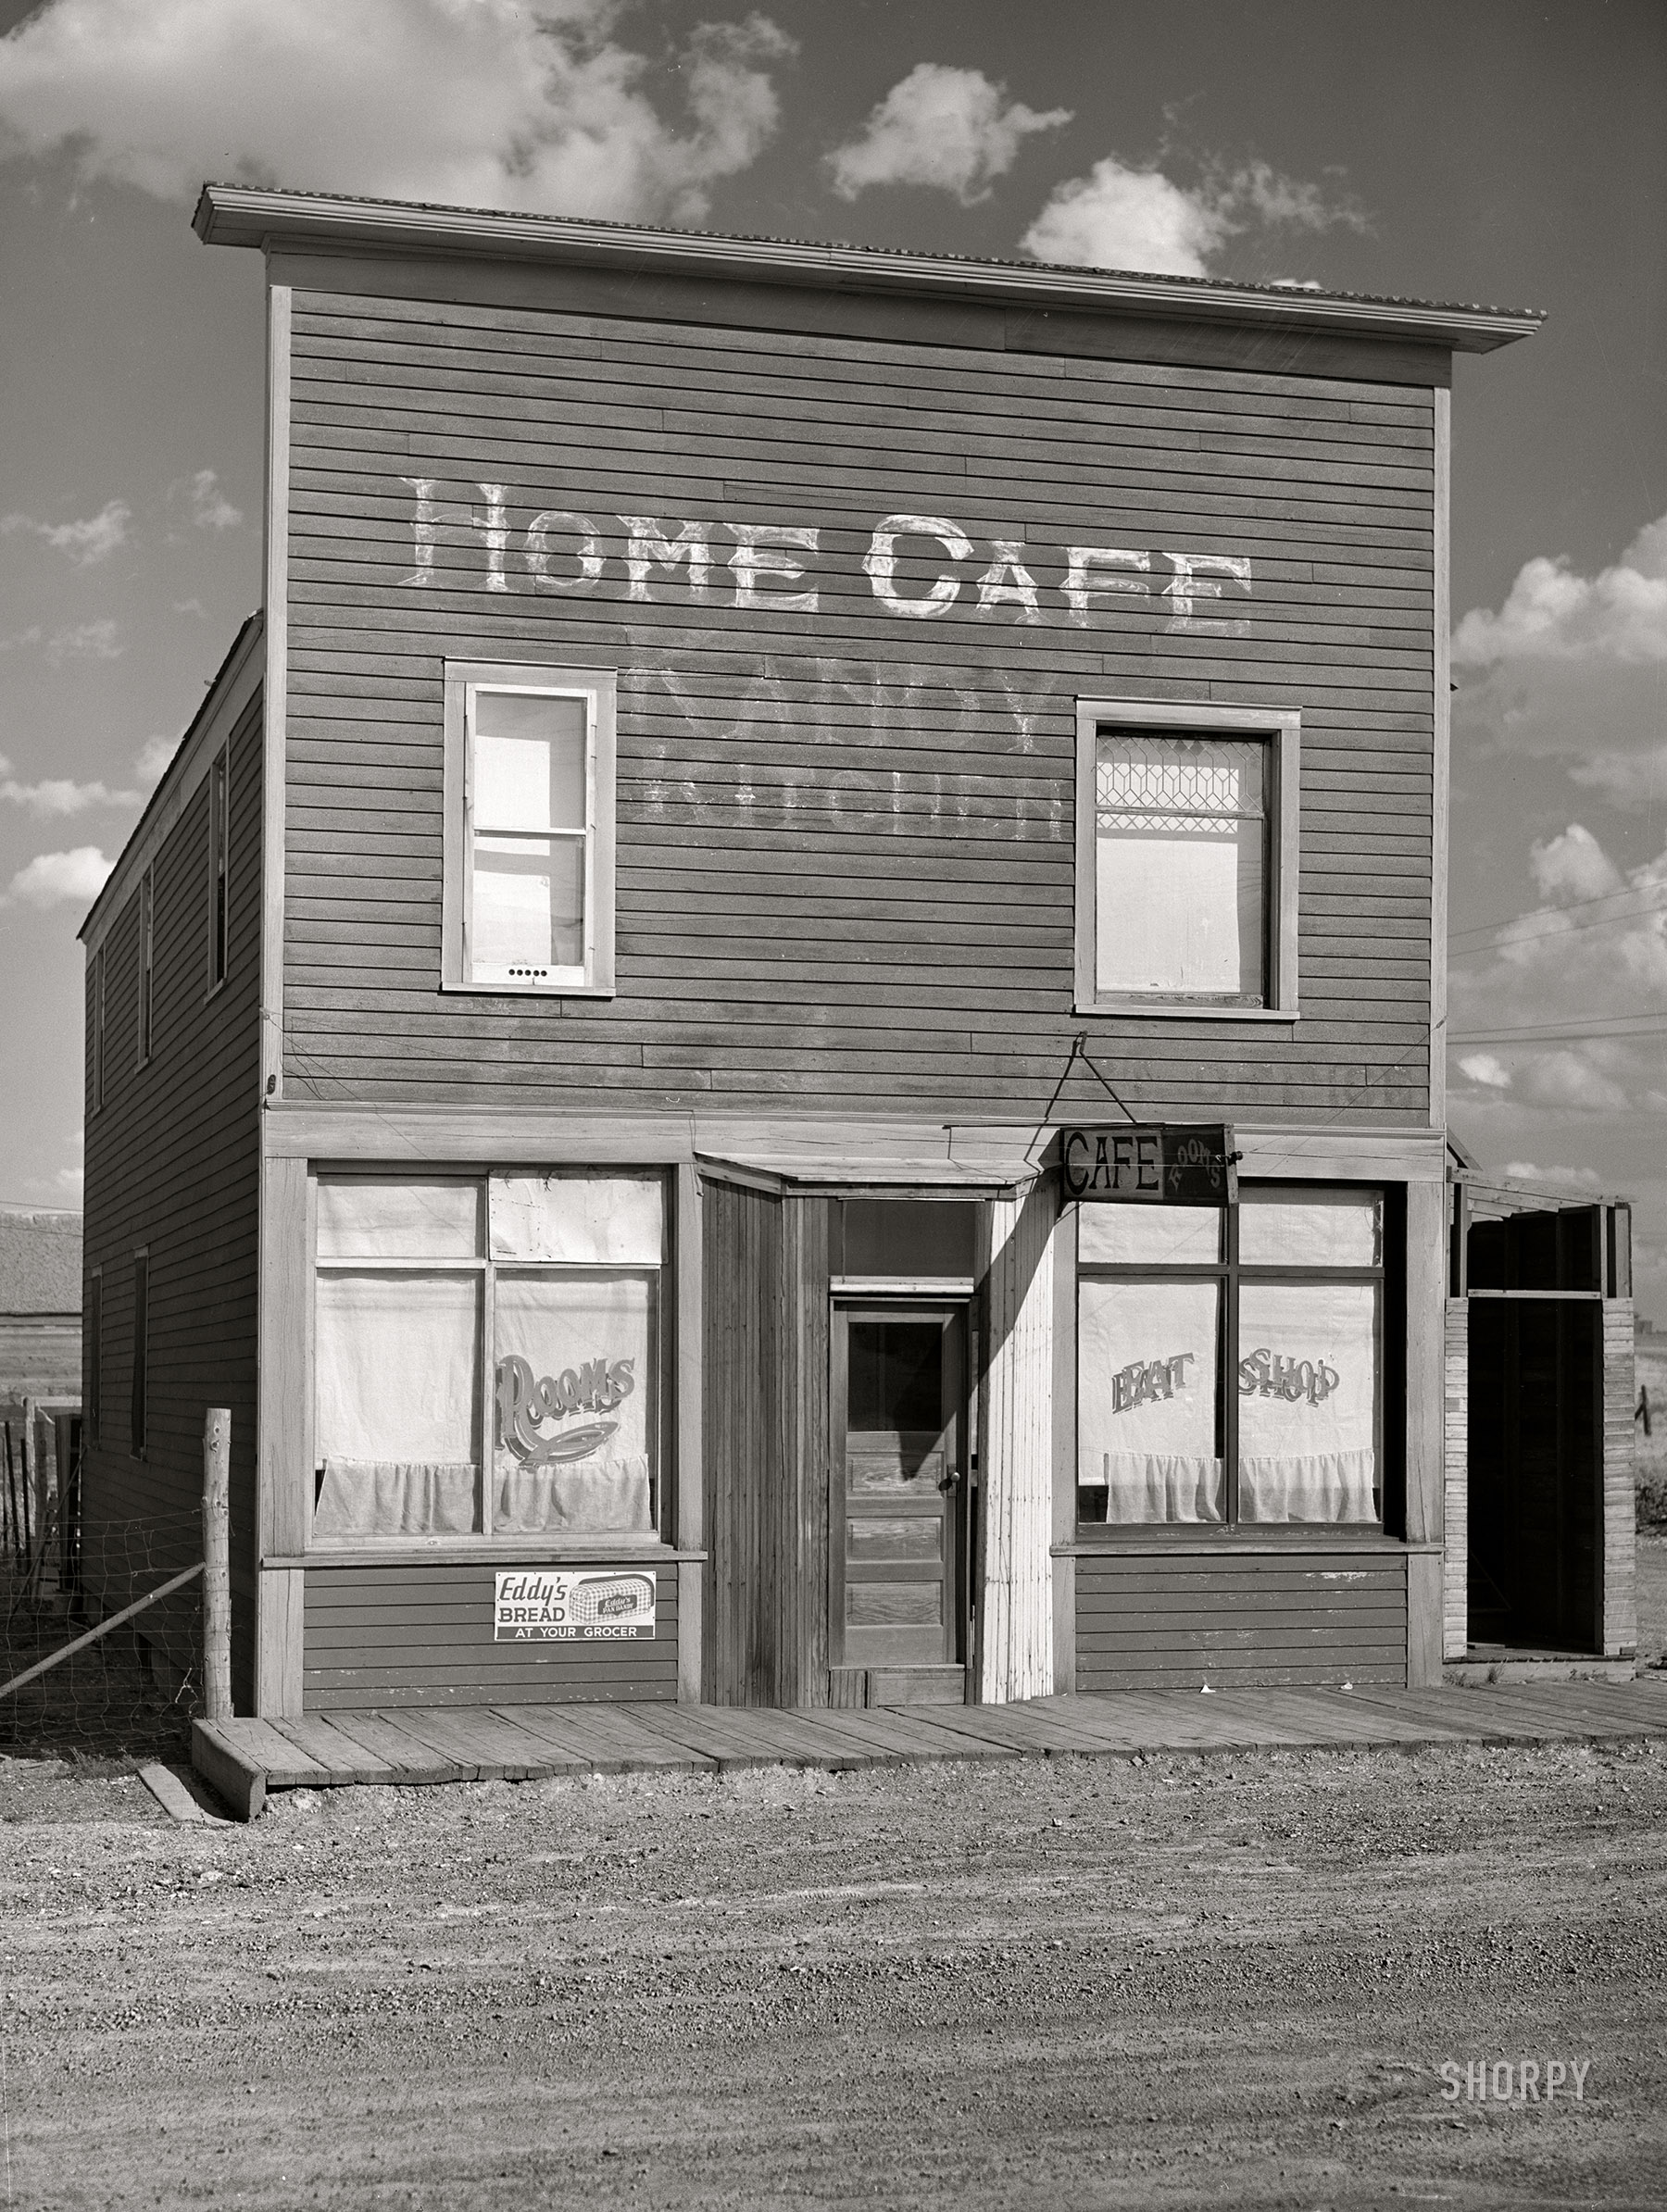 September 1941. "Building on main street of ghost town. Judith Basin County, Montana." The Home Cafe / Kandy Kitchen / Eat Shop. Also, Rooms. Medium format negative by Marion Post Wolcott for the Farm Security Administration. View full size.